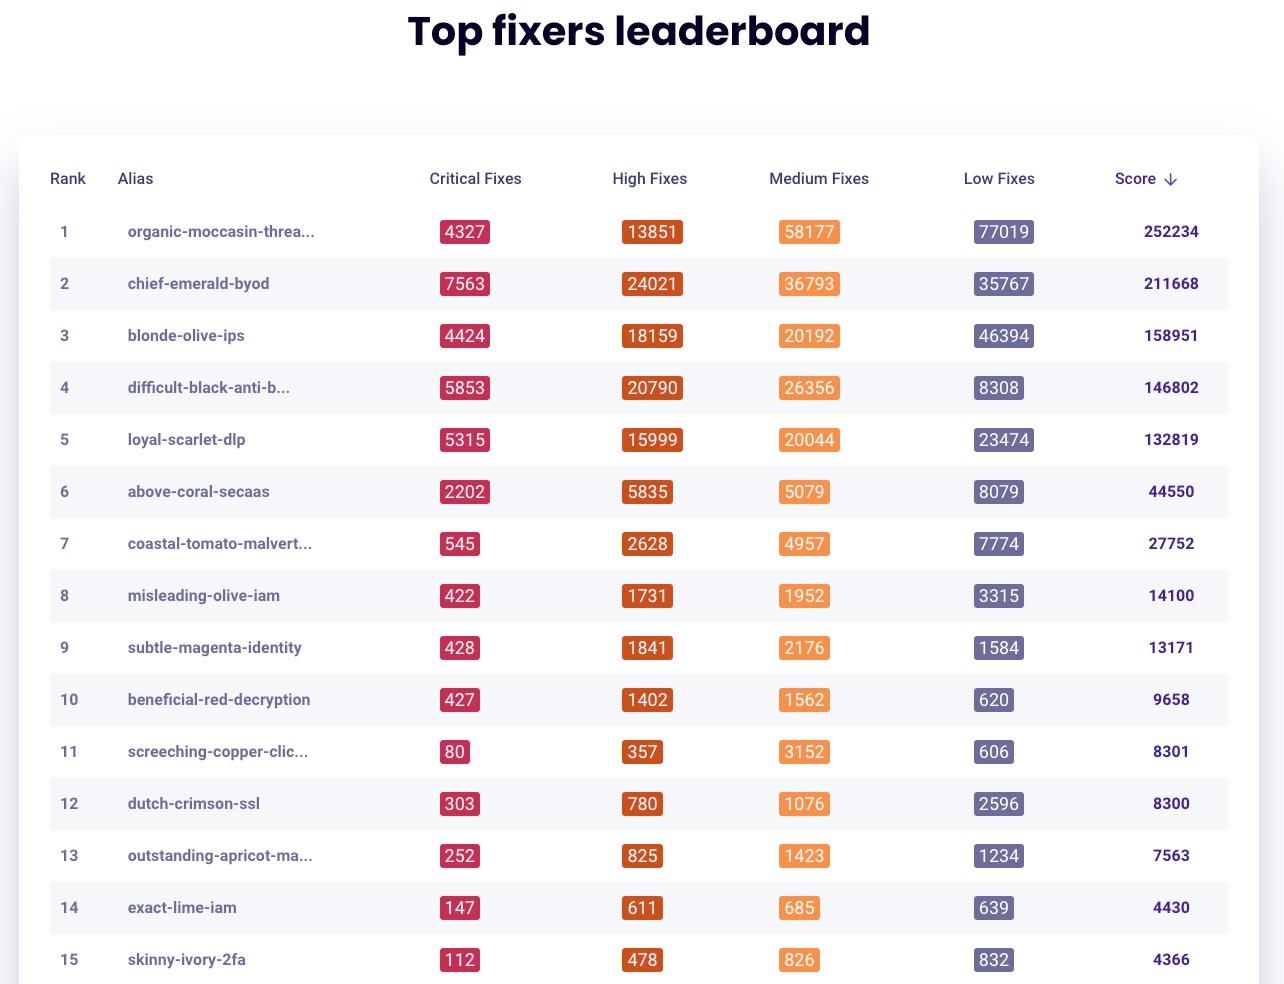 The leaderboard of top fixers from The Big Fix 2023.